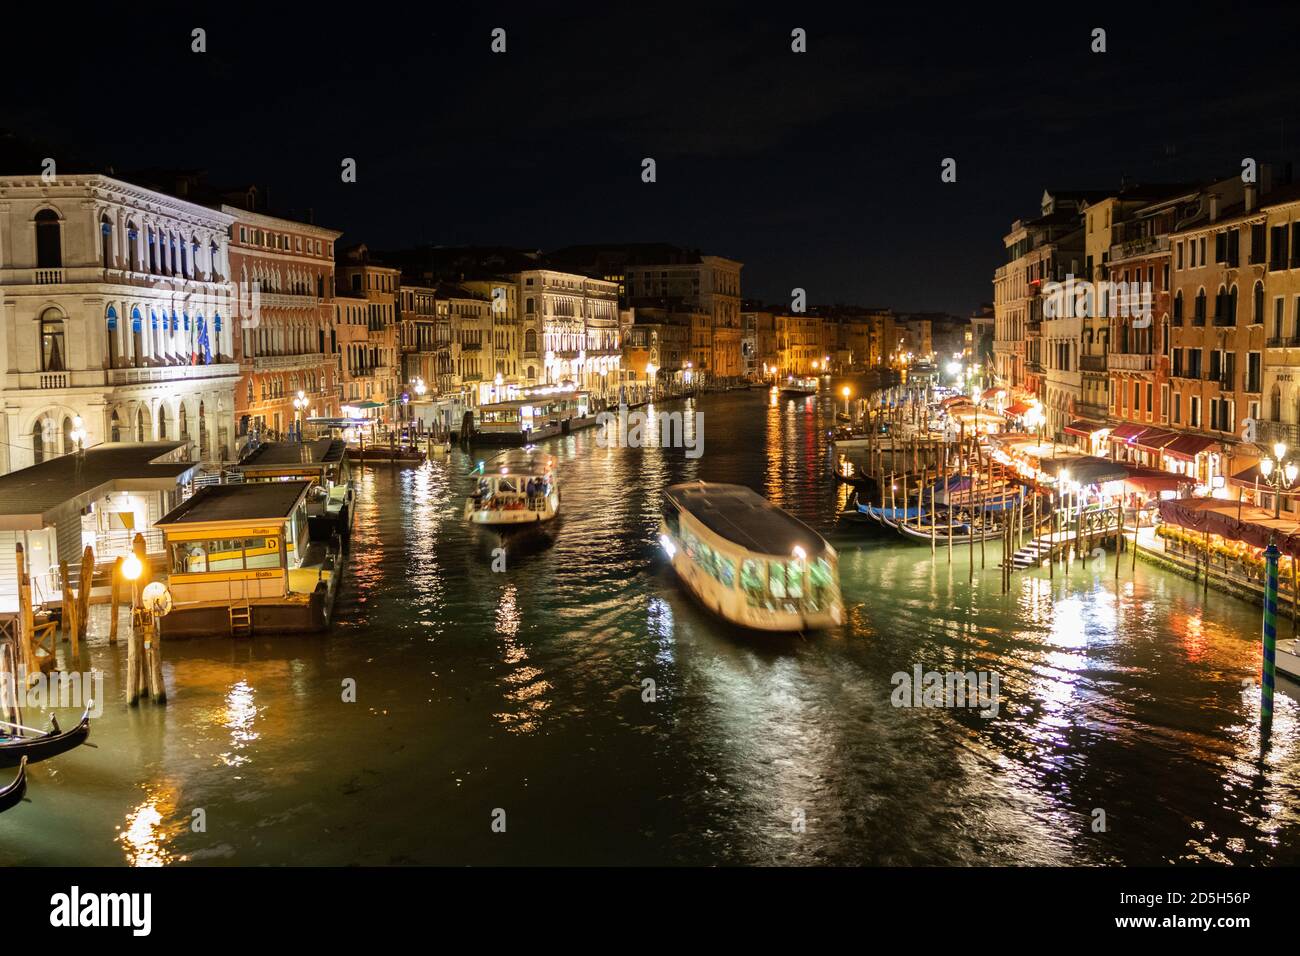 View of the Grand Canal and water taxis sailing on it at night time Stock Photo